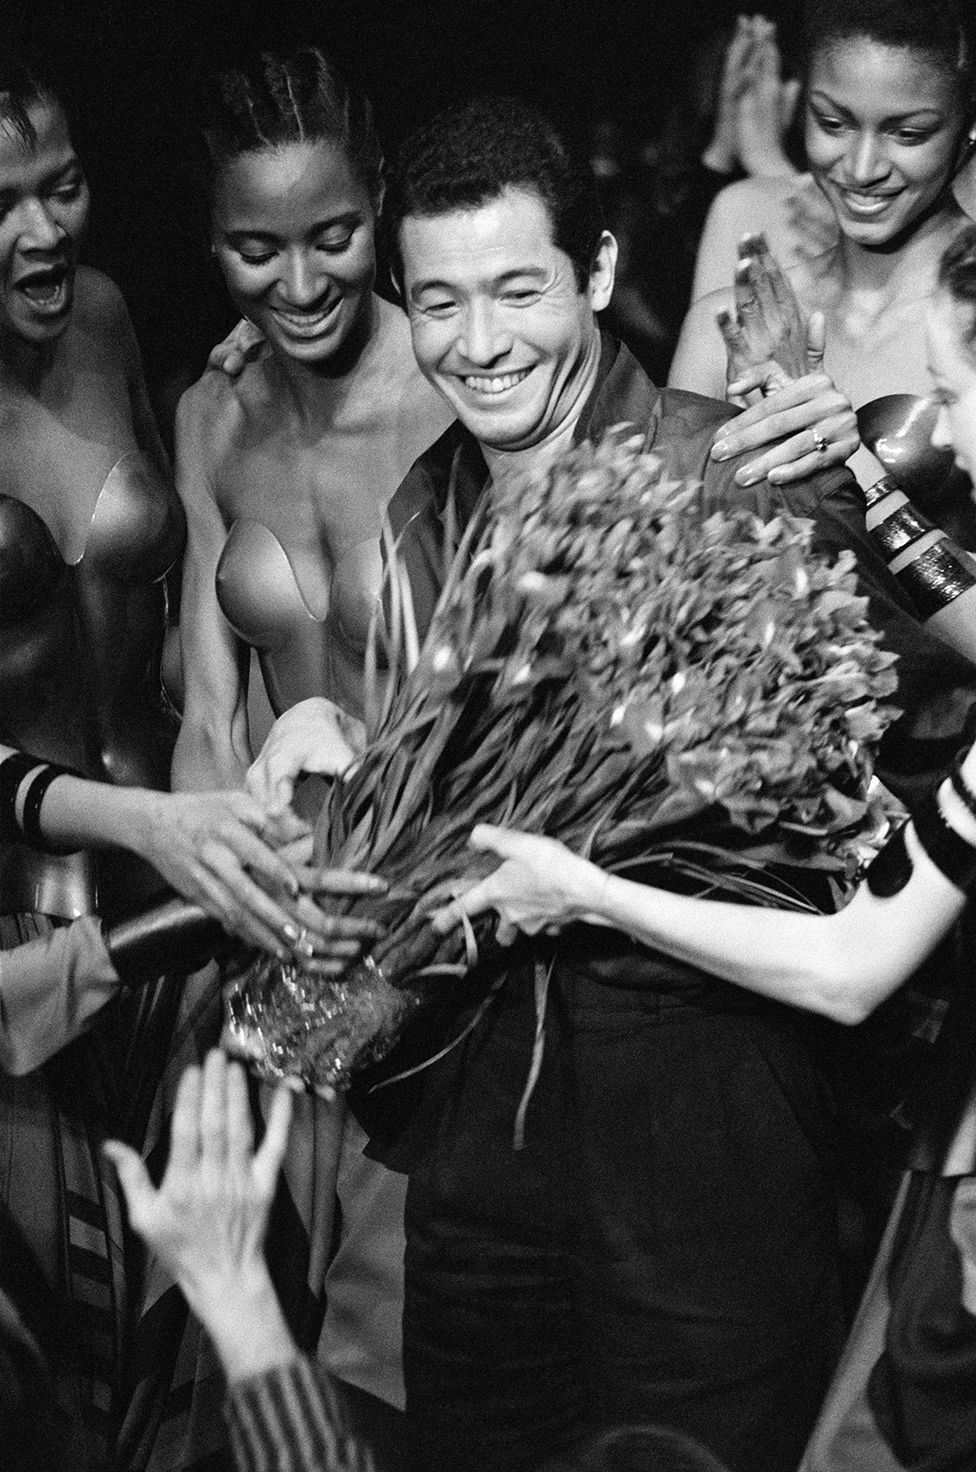 Issey Miyake and models during his Ready-to-Wear, Fall-Winter 1980-81 collection show in Paris, France